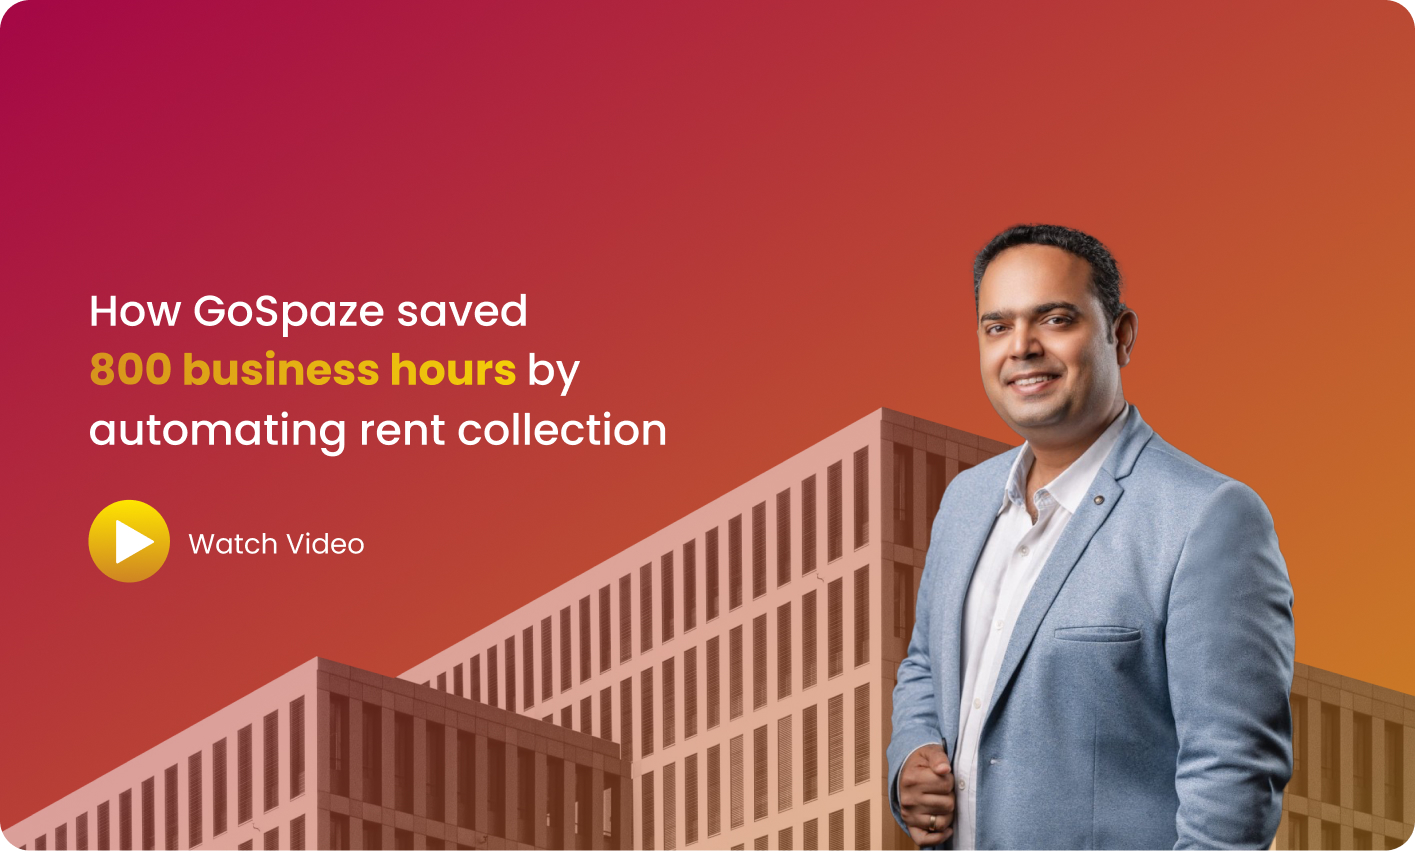 Case Study on how Core, our Property Management Solution helped GoSpaze, a property management company